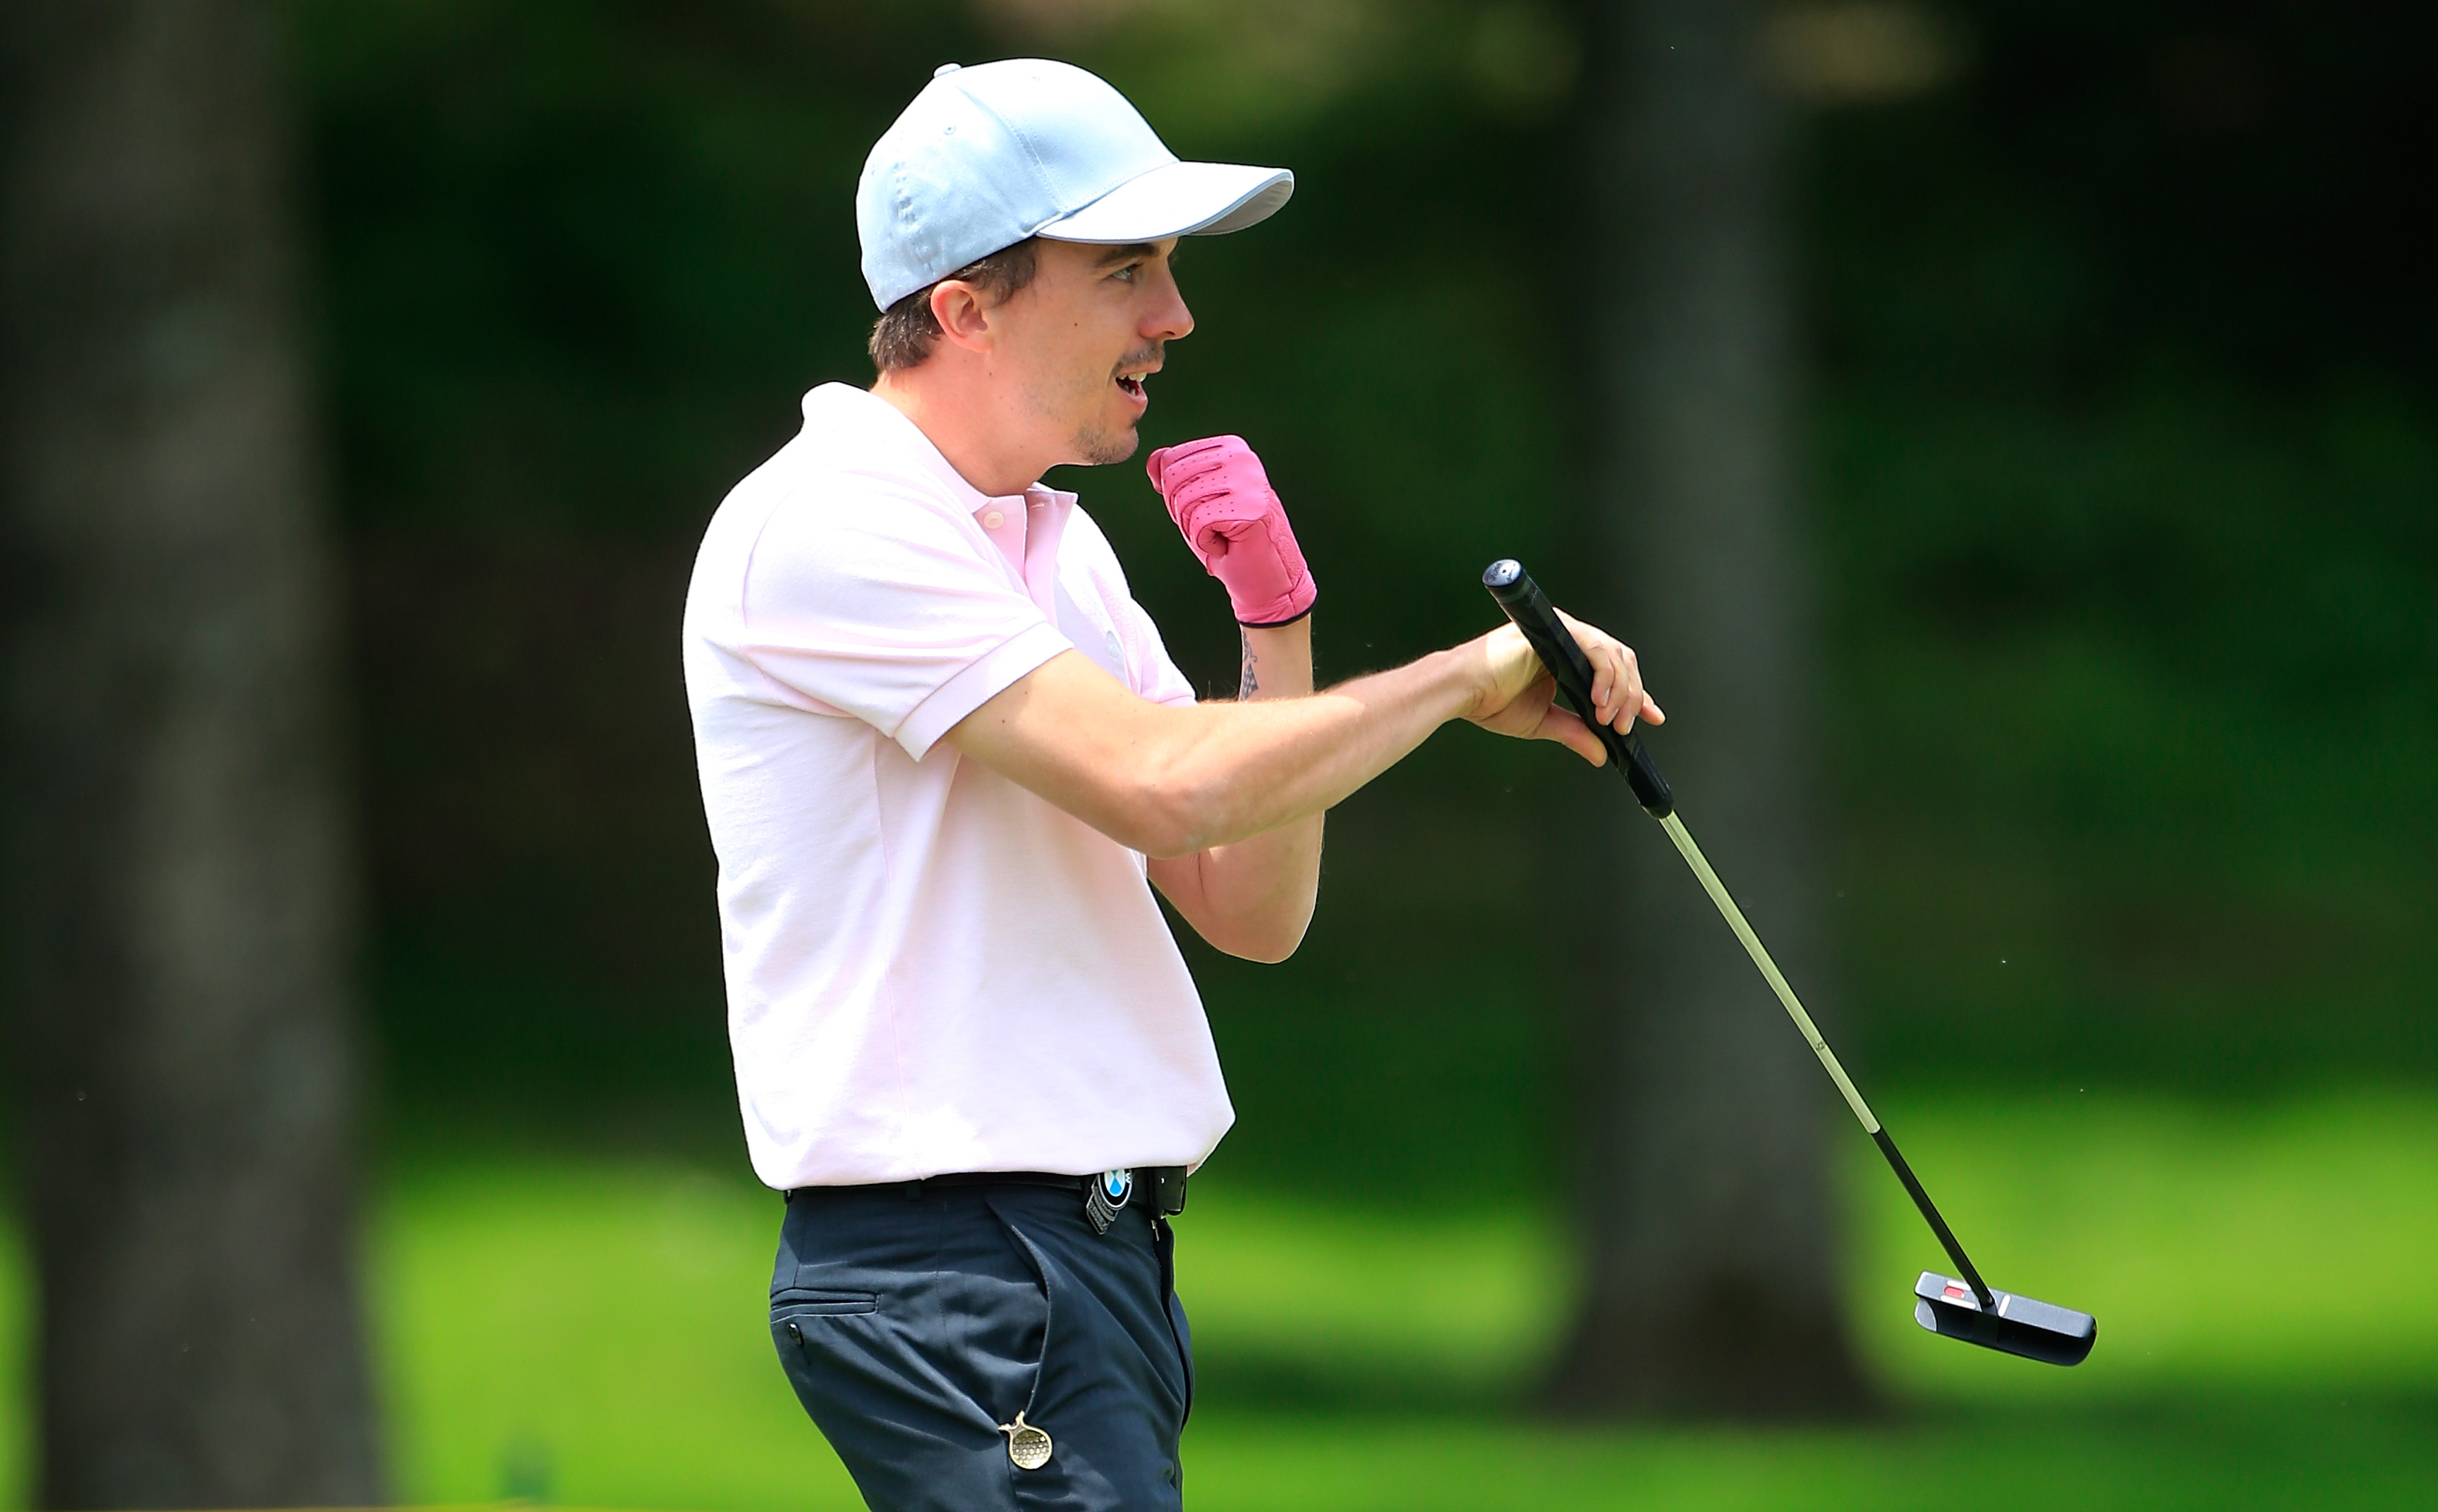 Frankie Muniz plays golf at the Thornblade Club on May 17, 2014 in Greer, South Carolina | Source: Getty Images